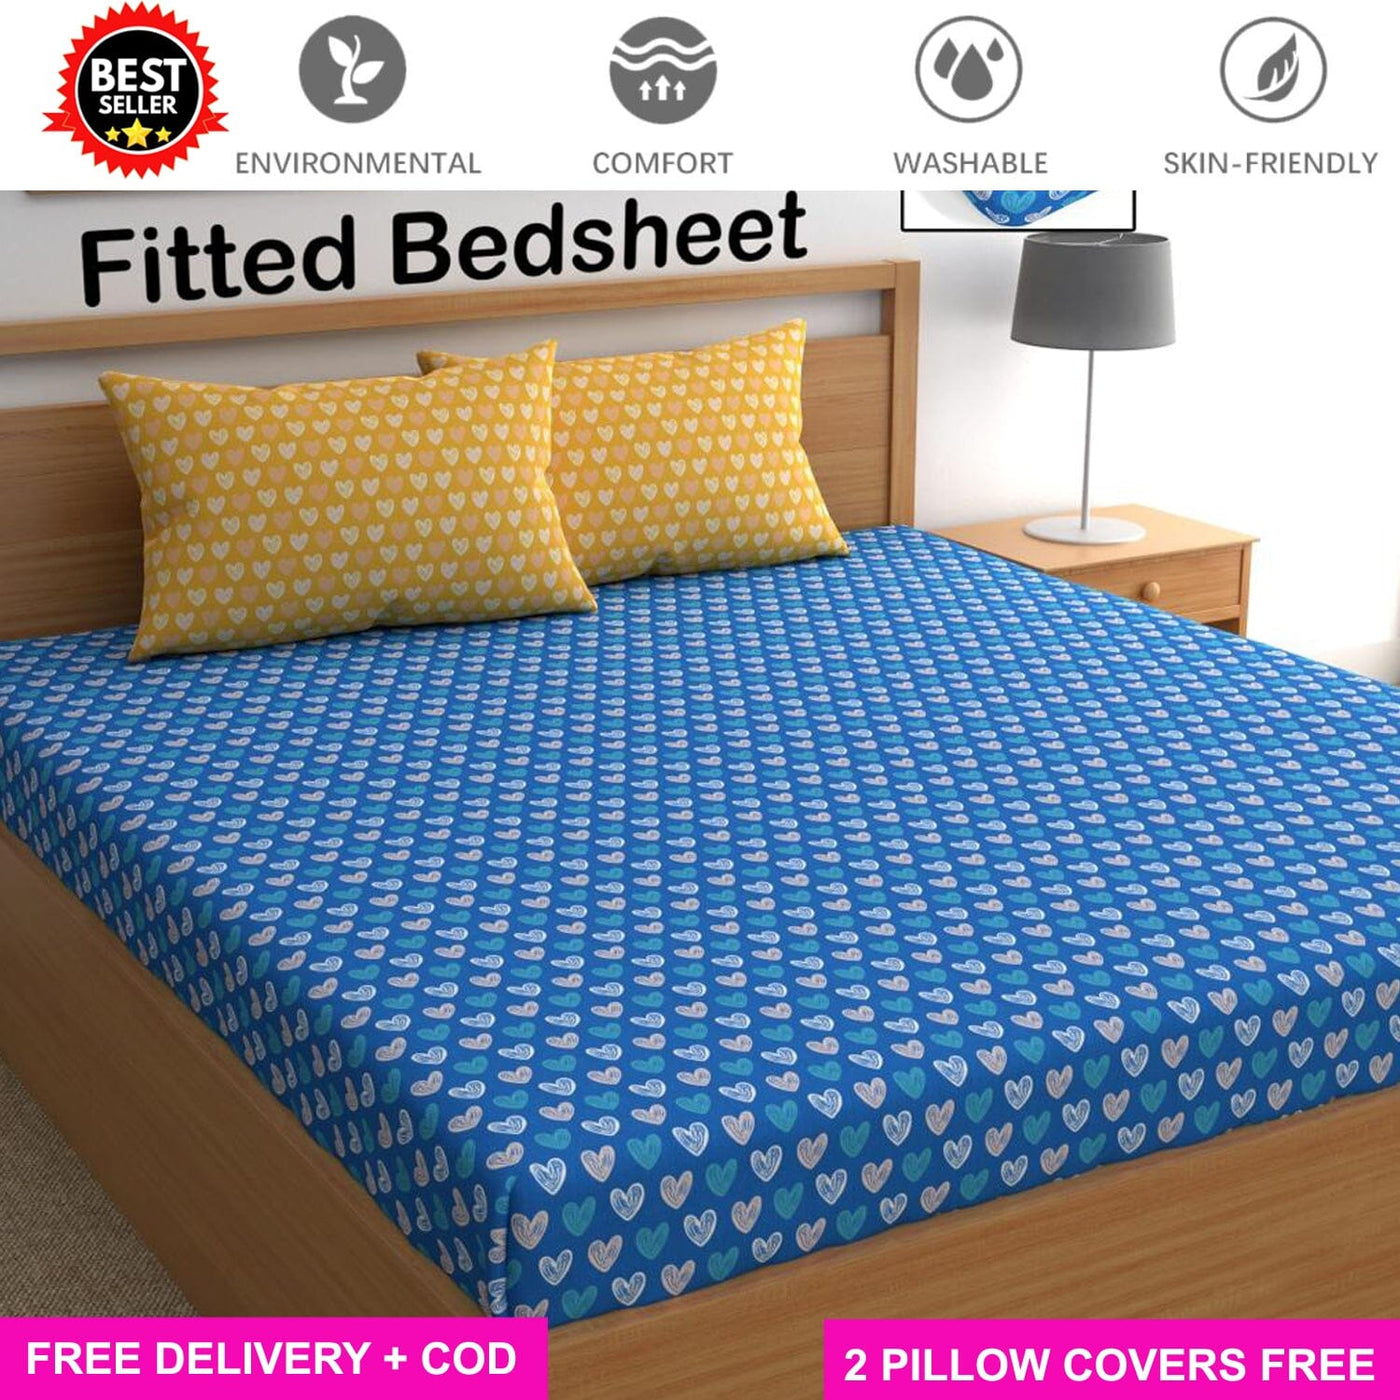 Blue Heart Contrast Full Elastic Fitted Bedsheet with 2 Pillow Covers - King Size Bed Sheets Great Happy IN 